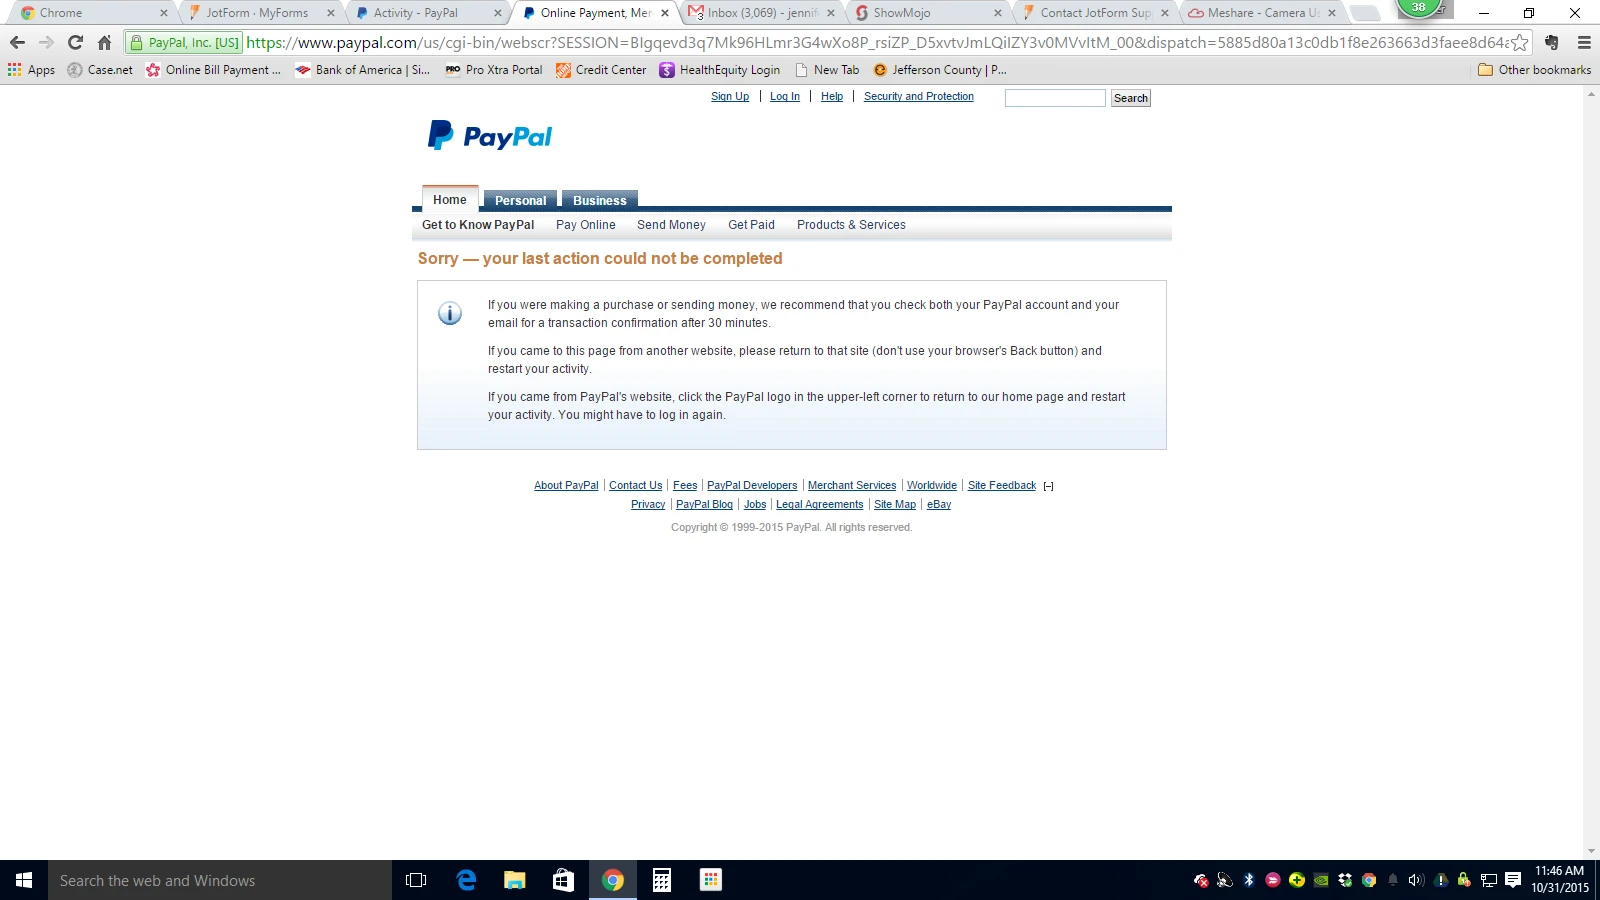 Credit Card option in Paypal form is not working Image 1 Screenshot 20